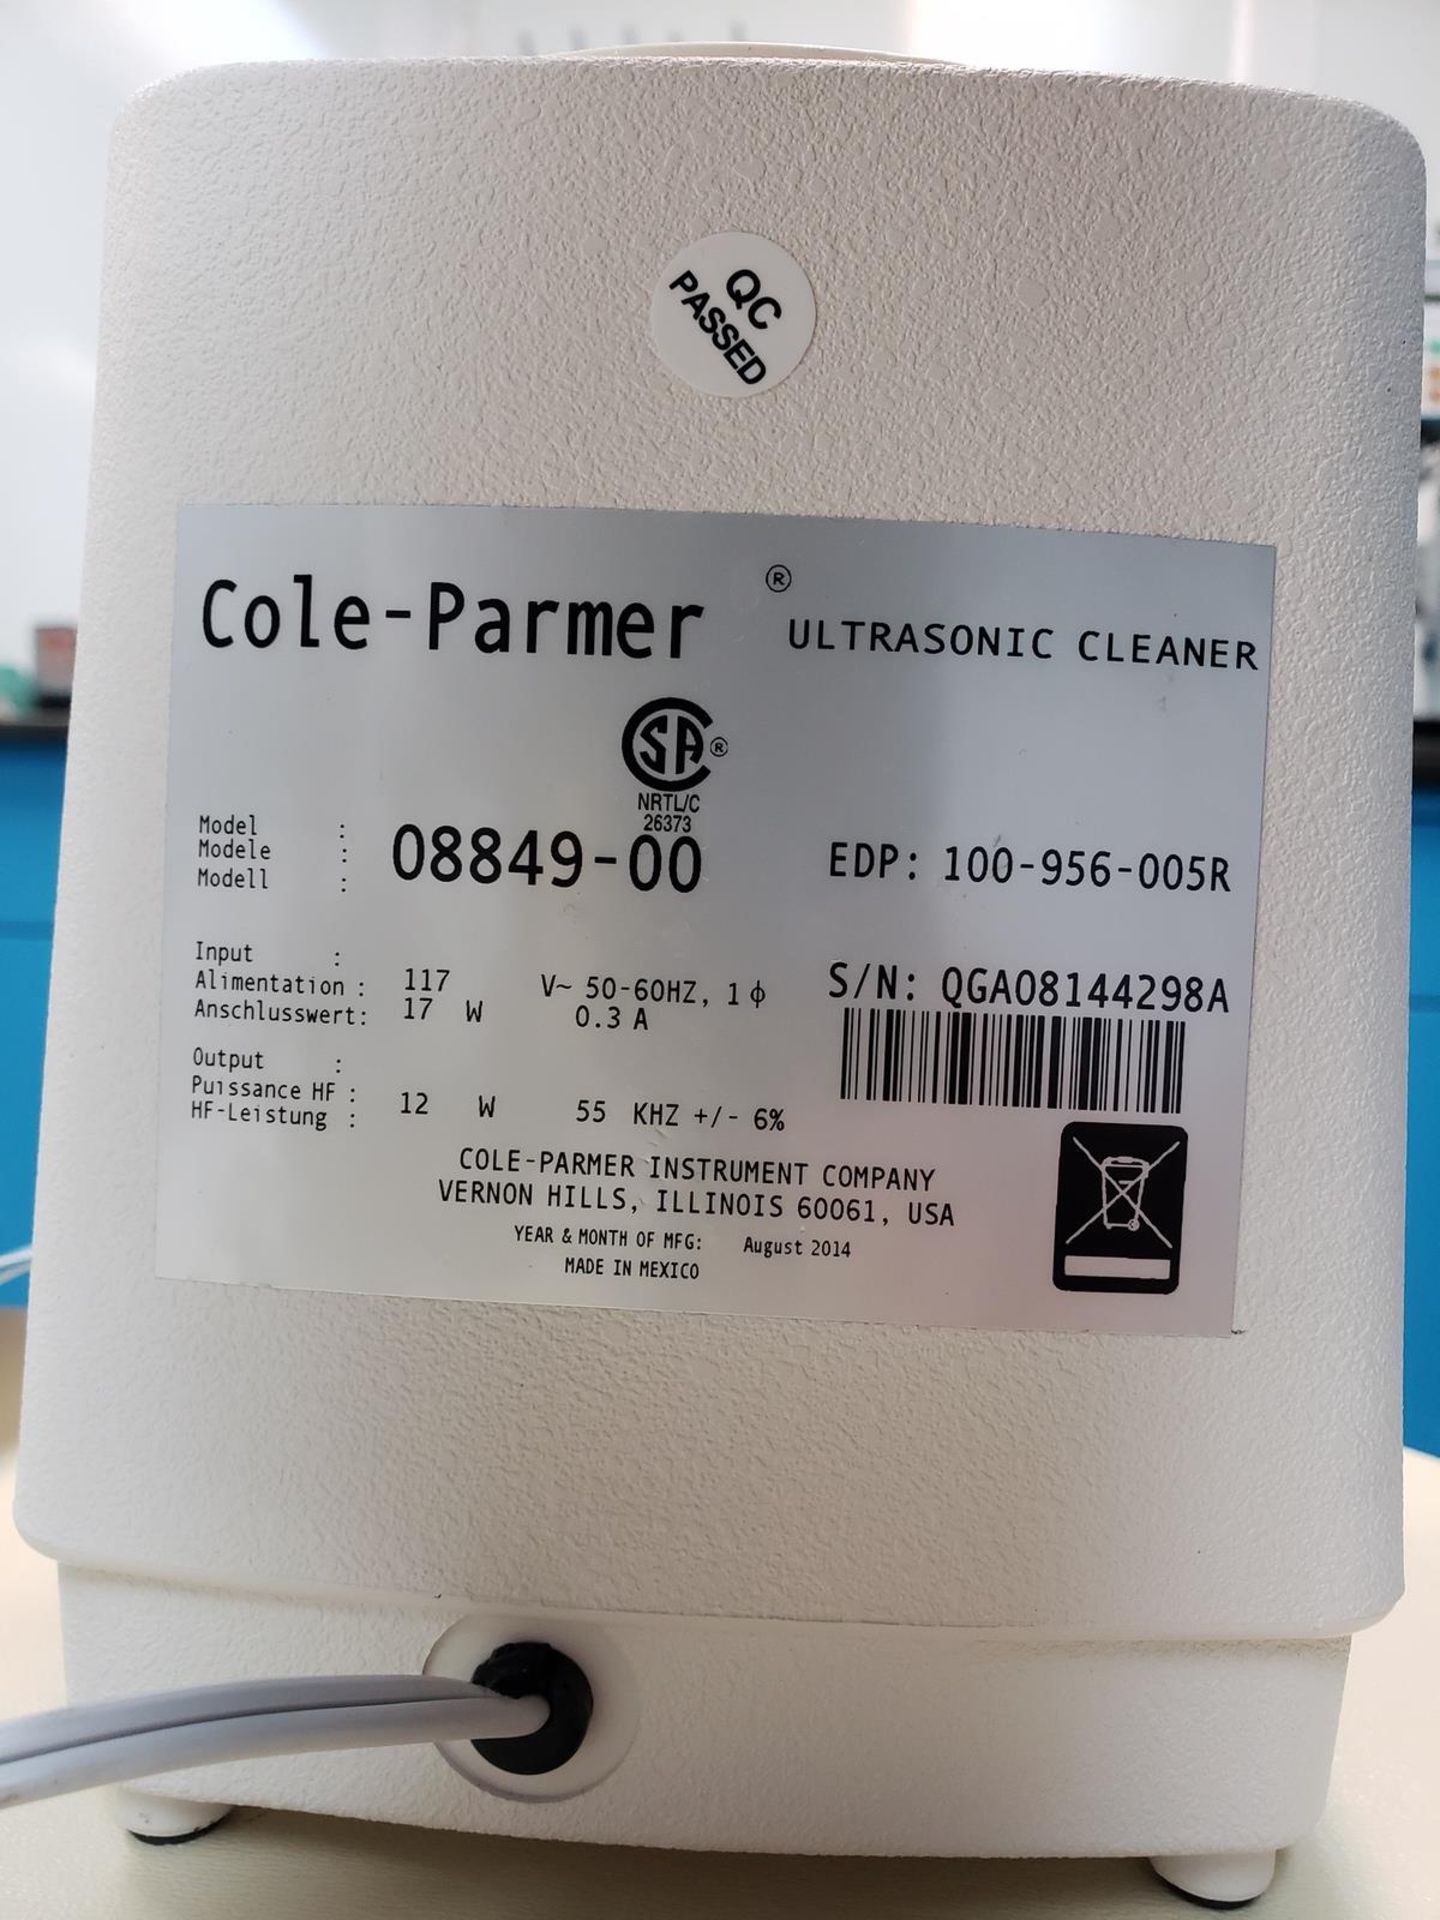 Cole-Parmer Ultrasonic Cleaner, M# 08849-00, S/N QGA08144298A - Image 2 of 2